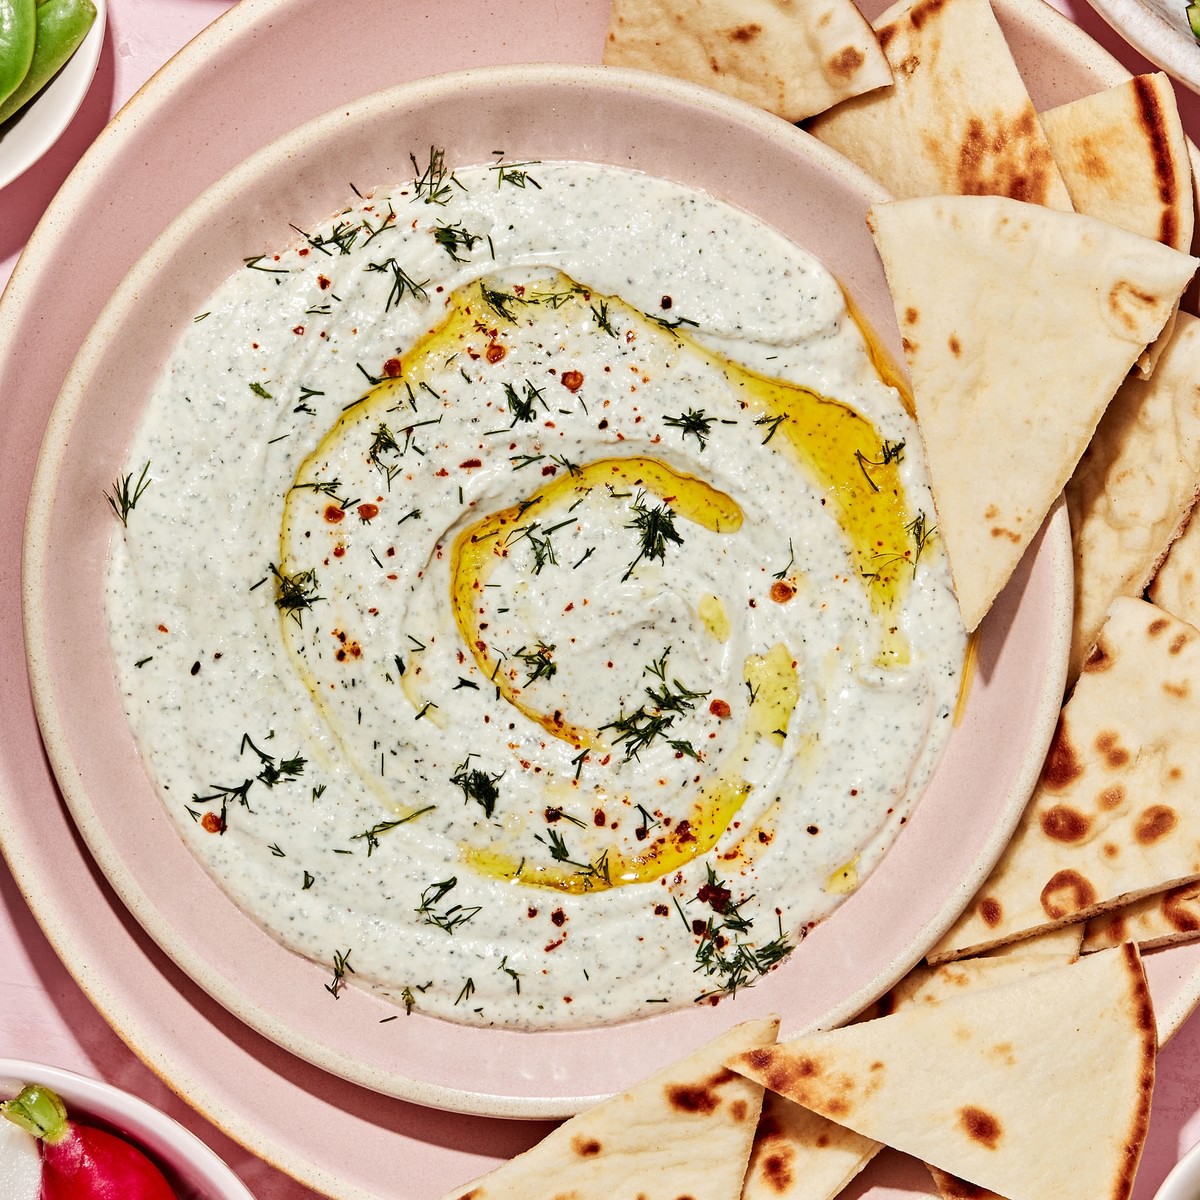 whipped feta dip in a serving bowl surrounded by sliced pita bread, and roasted and raw vegetables for dipping